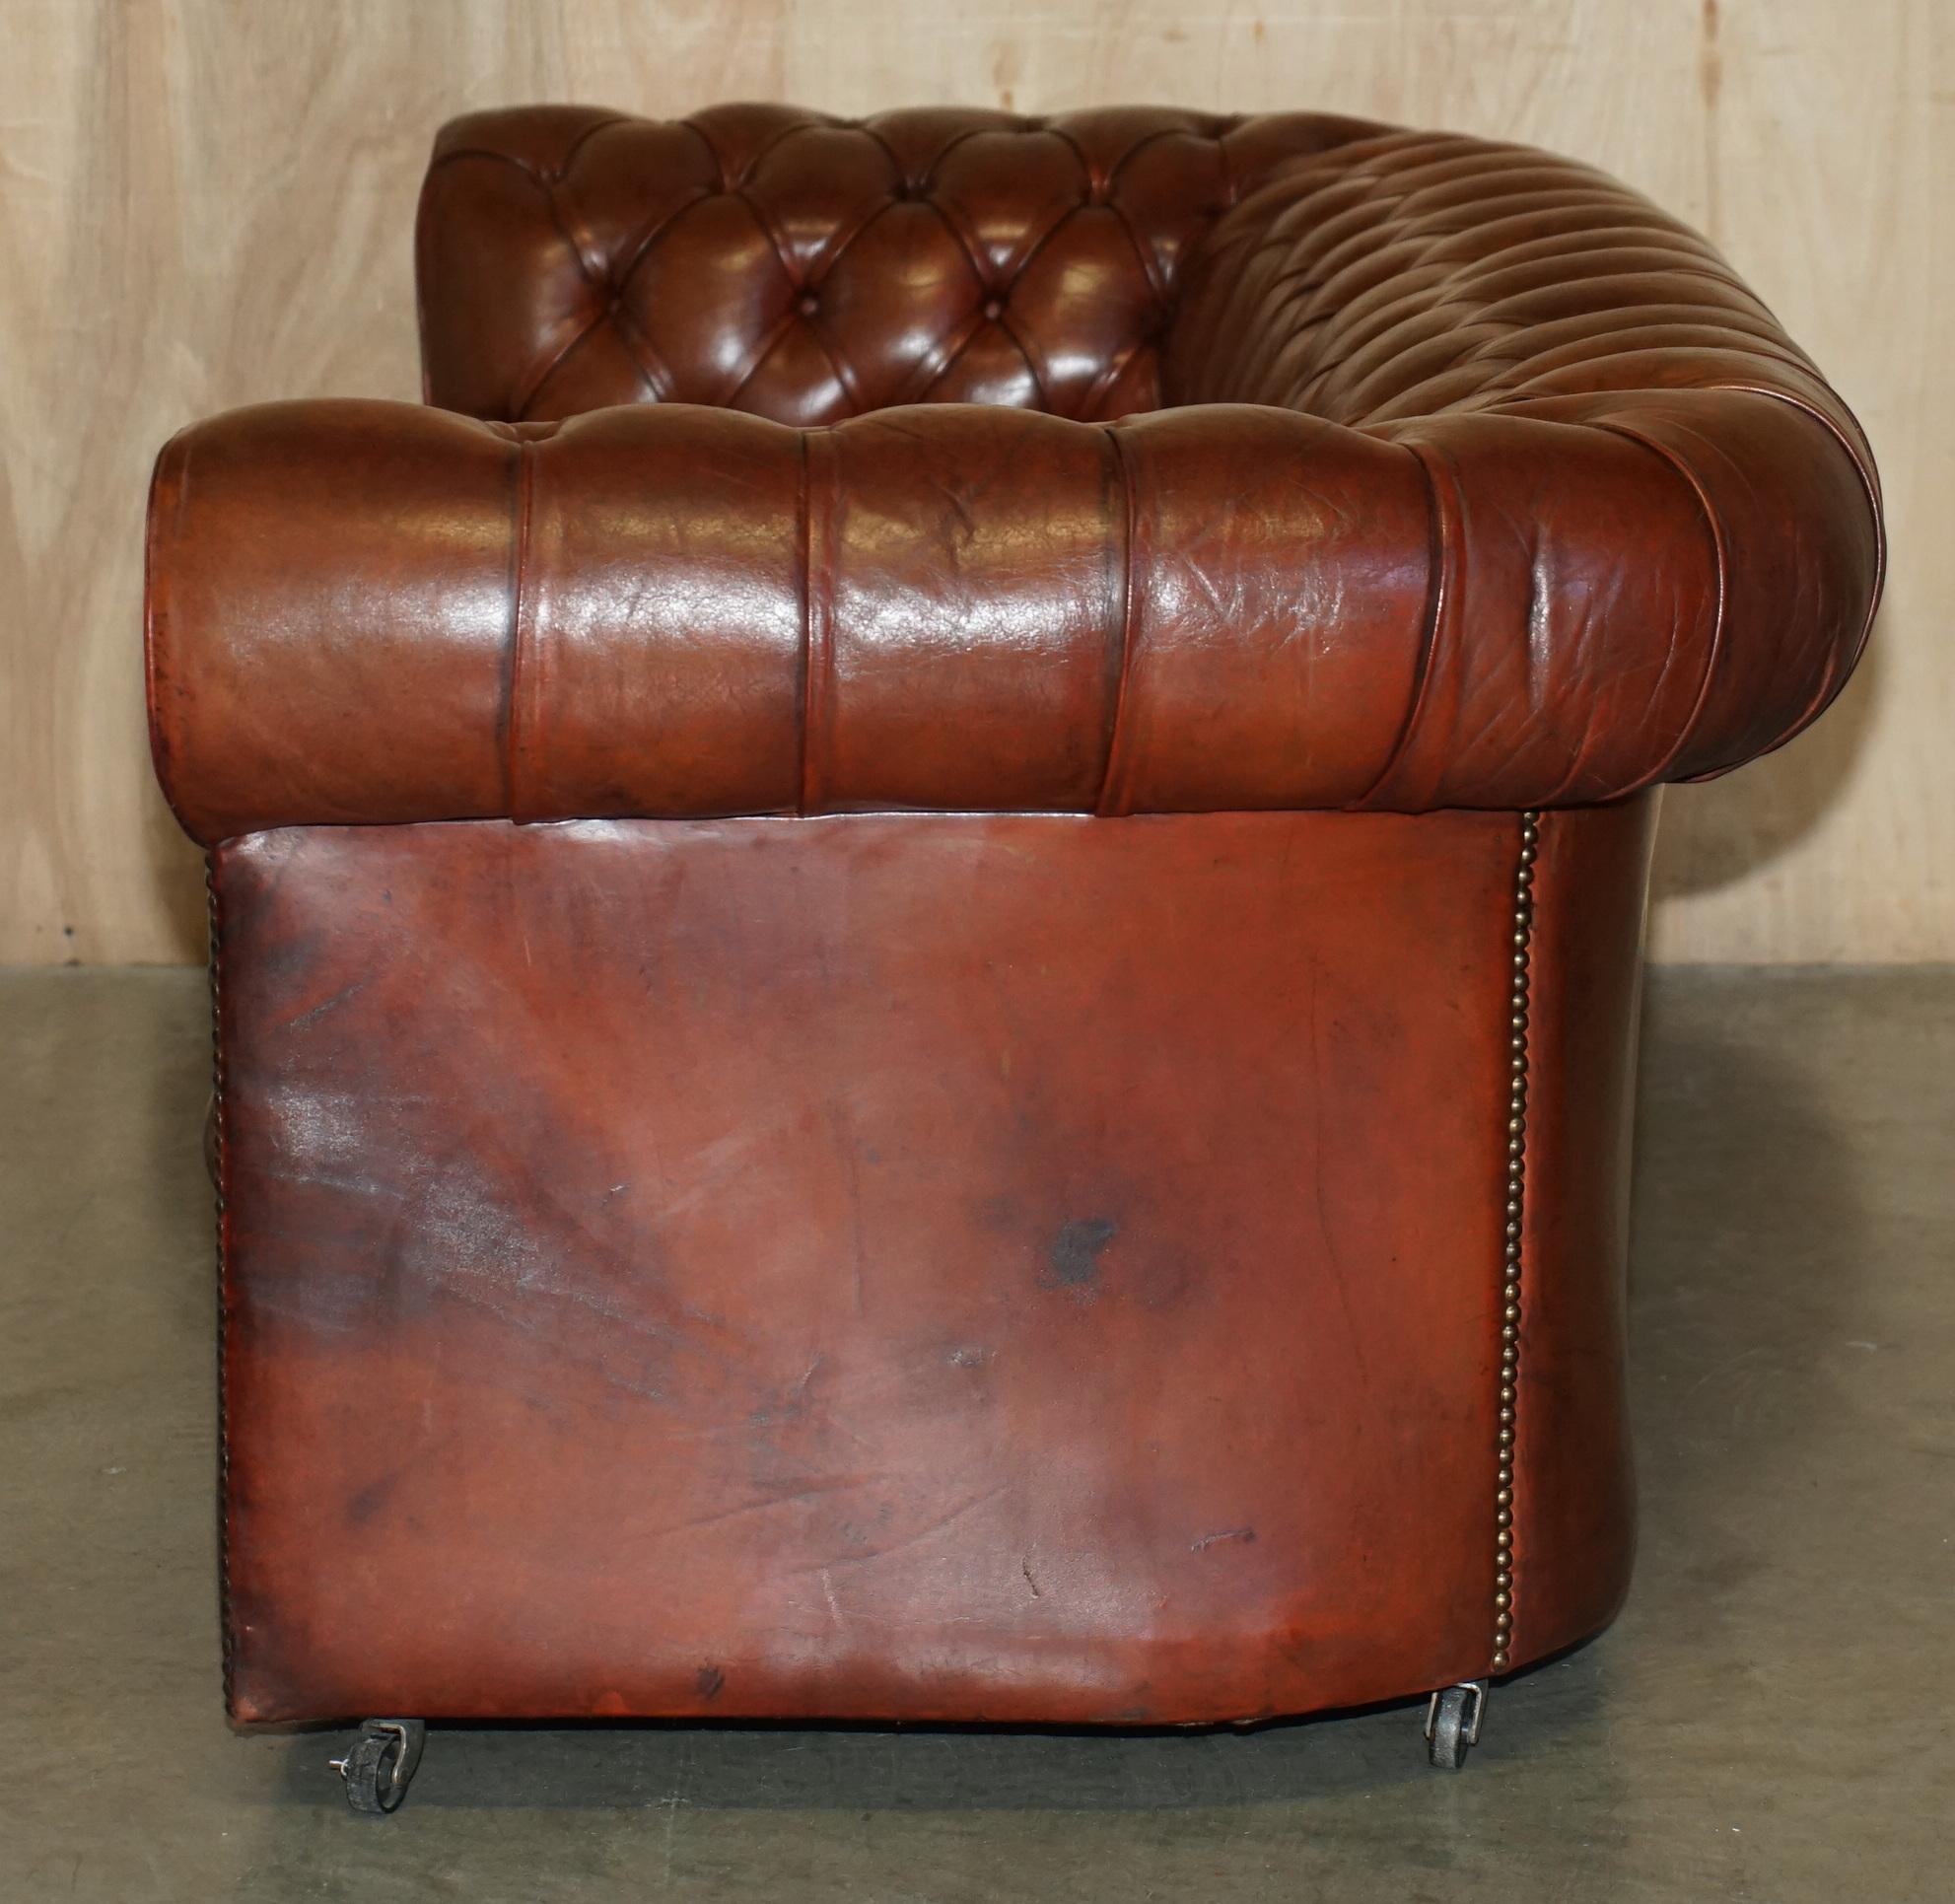 FULLY COIL SPRUNG VINTAGE 1920's HAND DYED BROWN LEATHER CHESTERFIELD CLUB SOFA For Sale 6